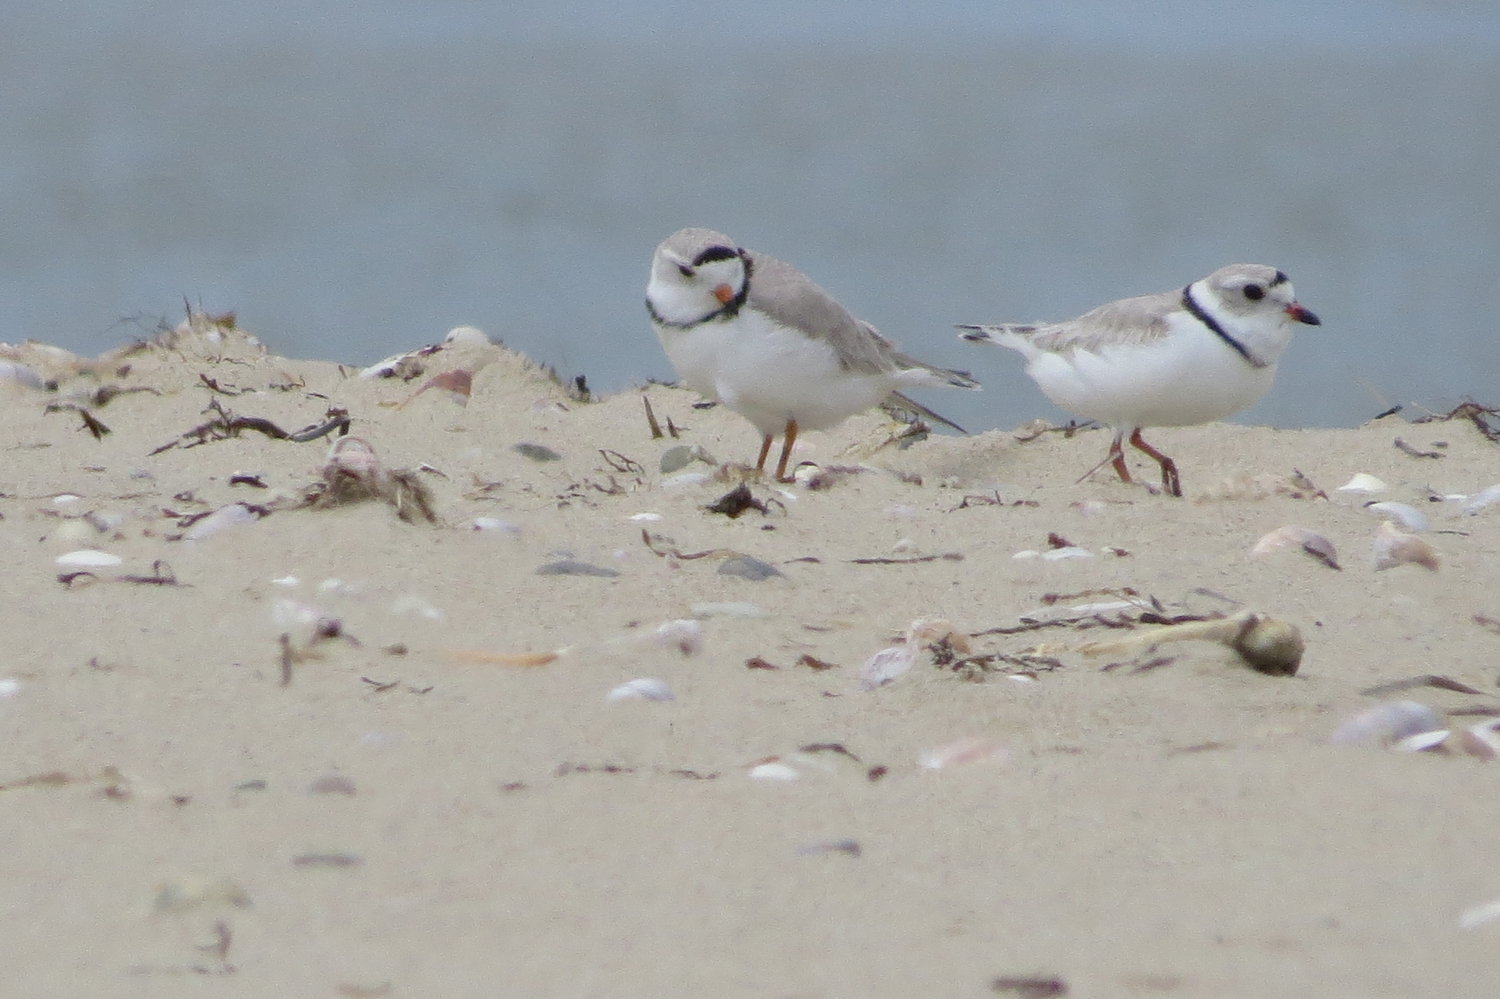 Piping plovers on the beach.